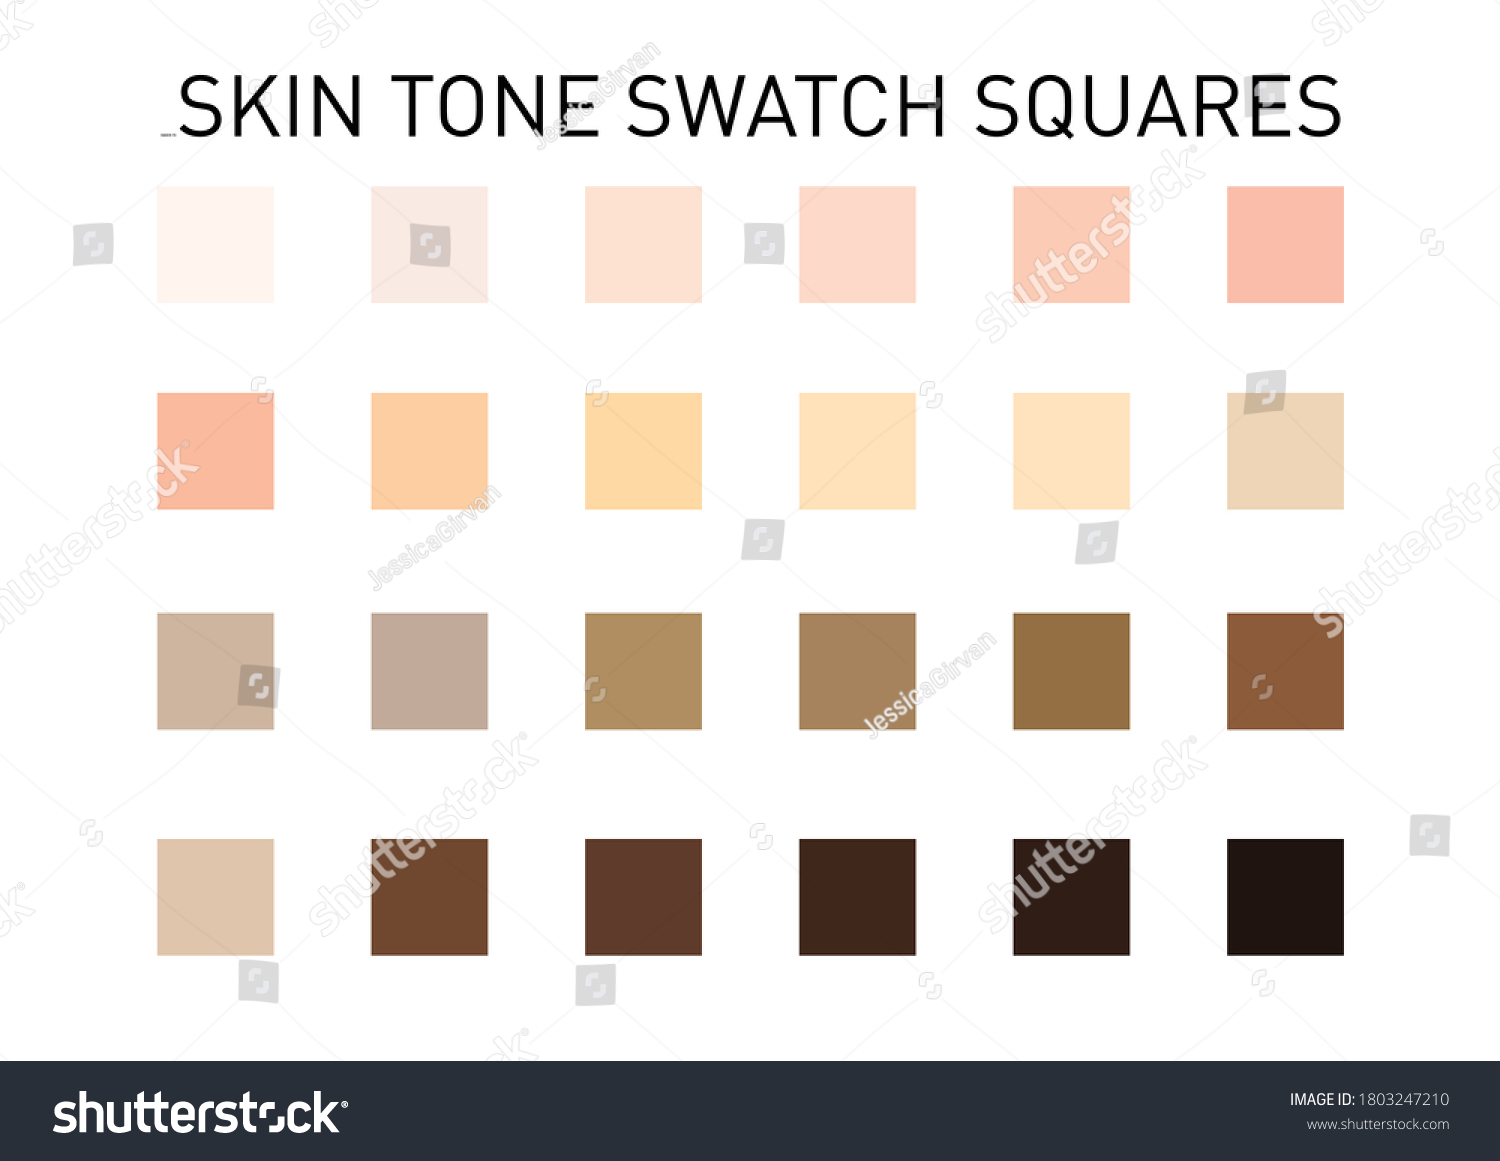 Skin Tone Swatch Squares Vector Stock Vector (Royalty Free) 1803247210 ...